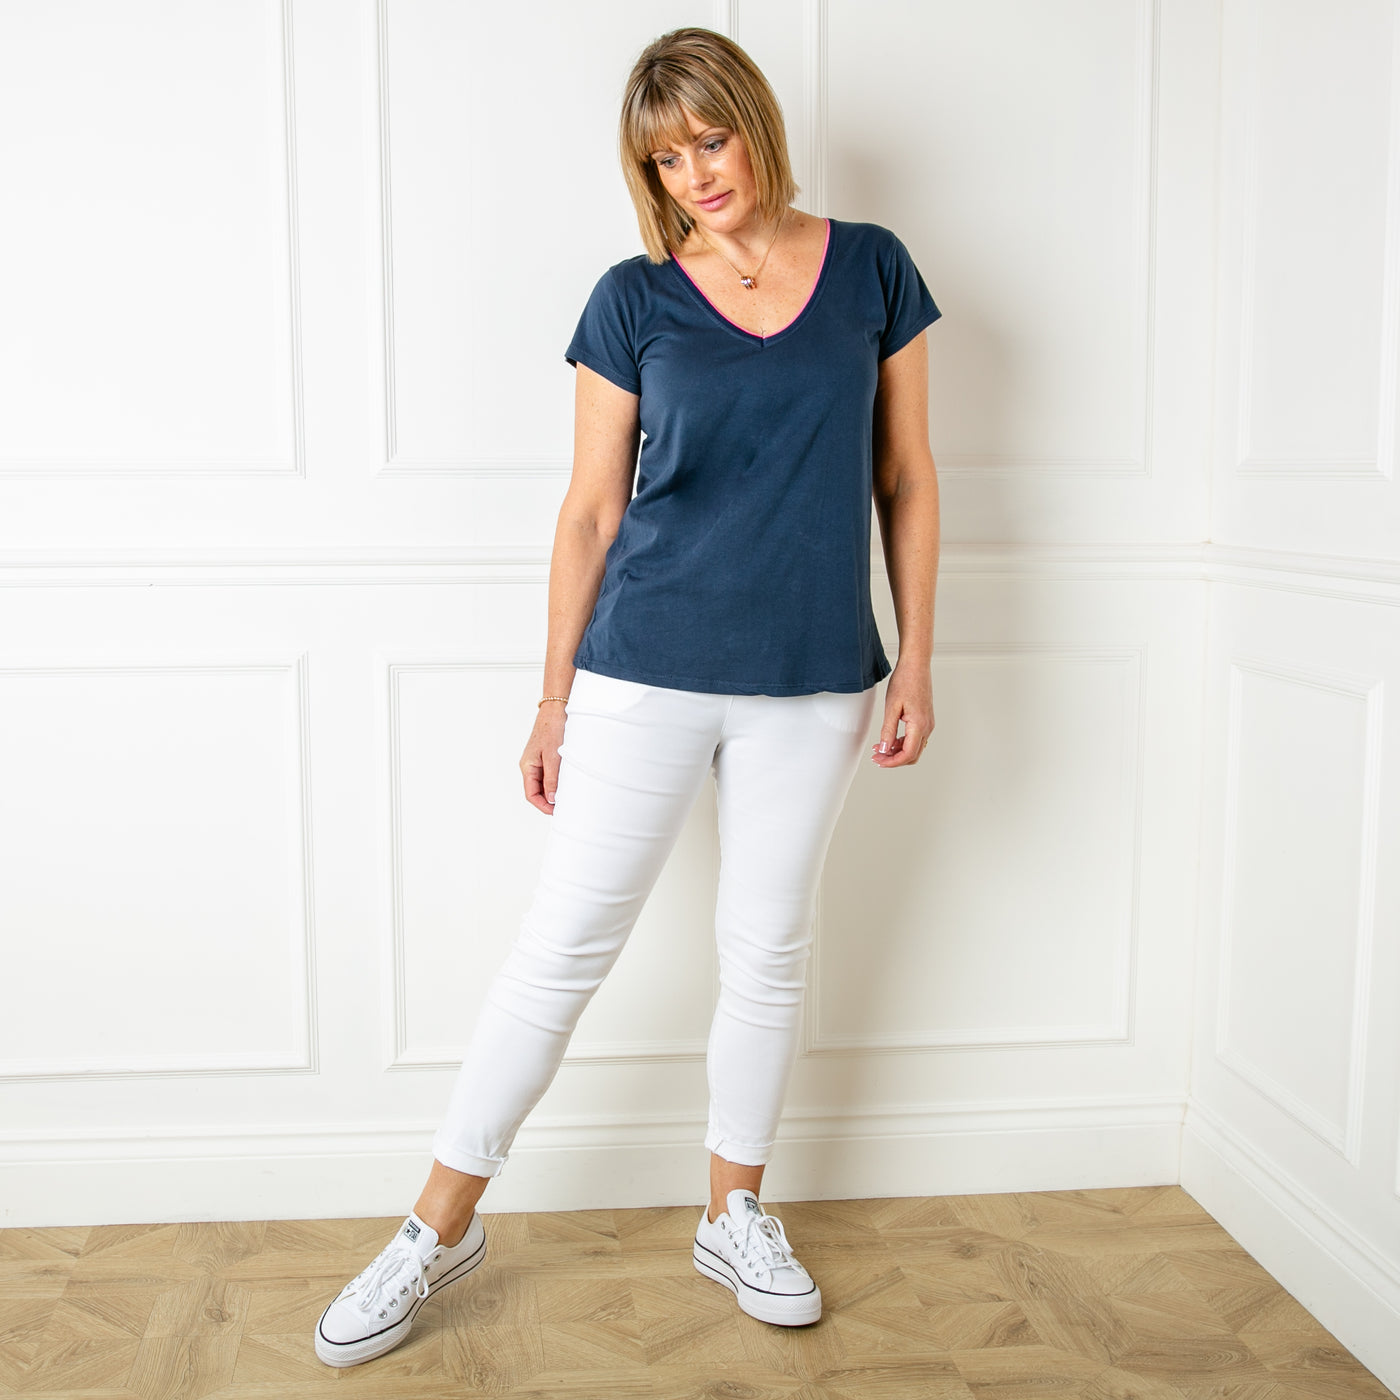 The Clashing T-shirt in navy blue with a contrasting pink trim around the neckline